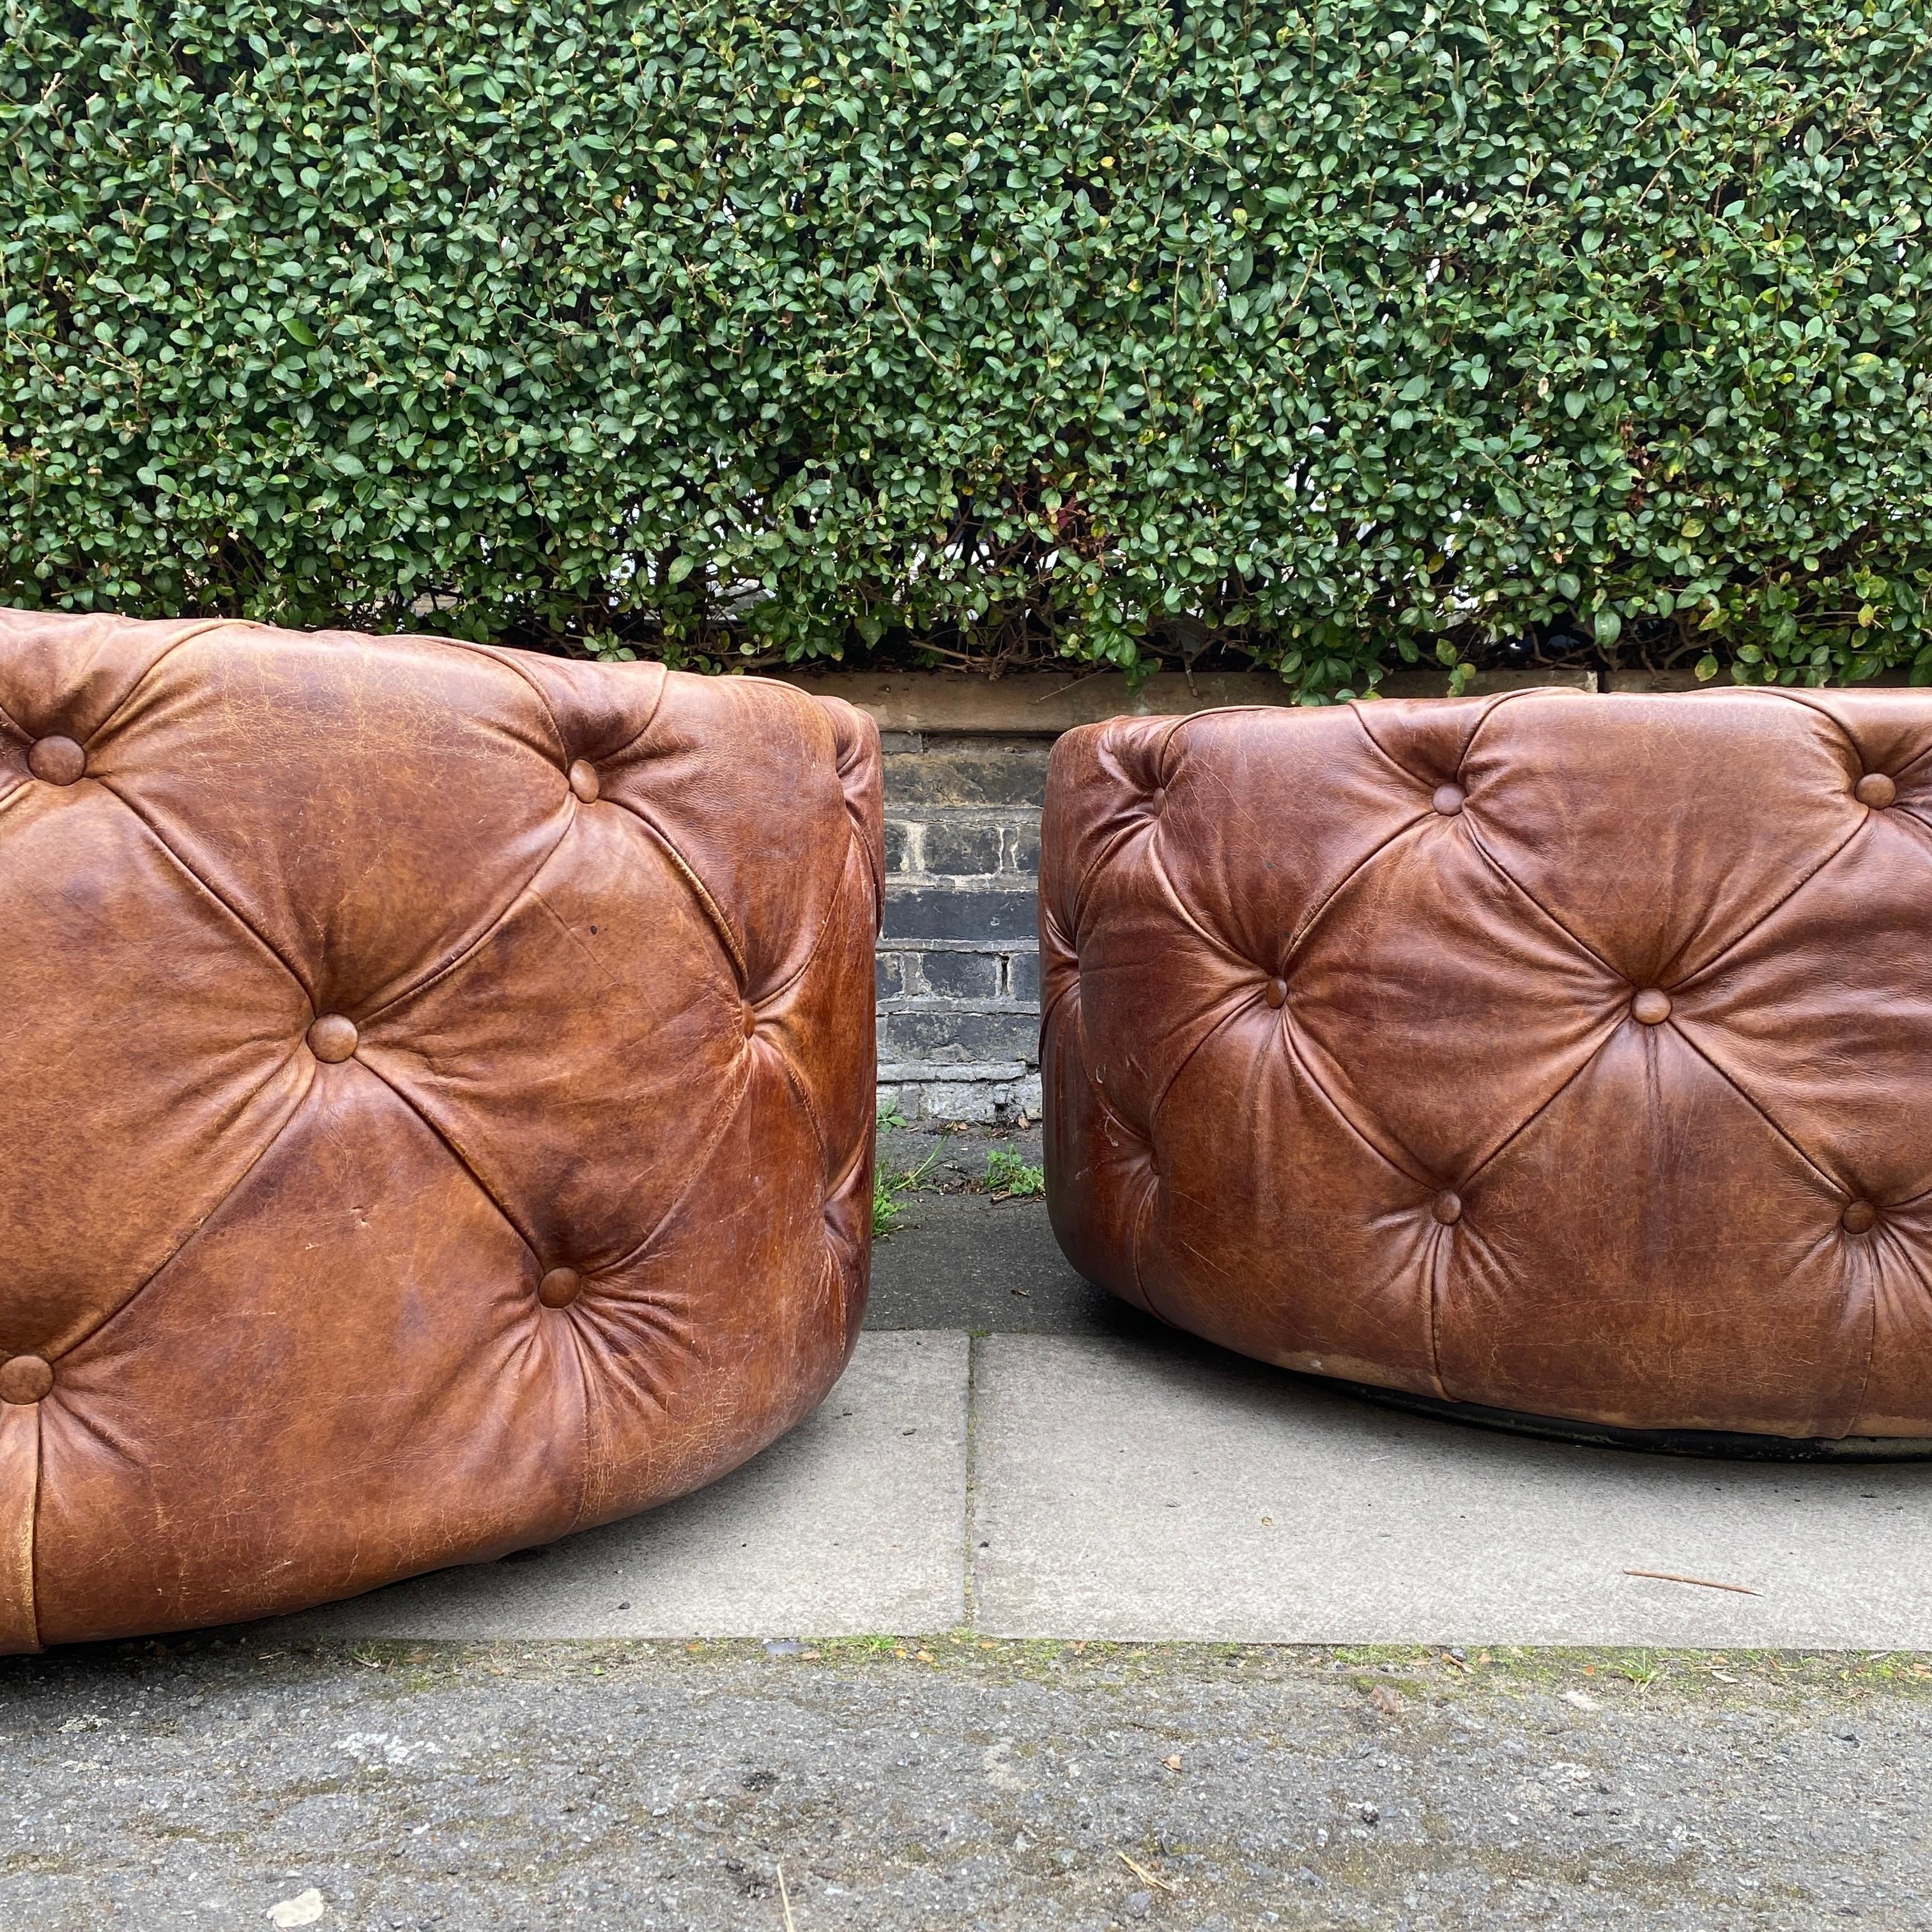 Introducing a pair of exquisite Large Round Leather Rotating Buttoned Ottomans, a delightful combination of elegance and functionality. With two of these unique pieces available, you have the opportunity to transform your living space into a